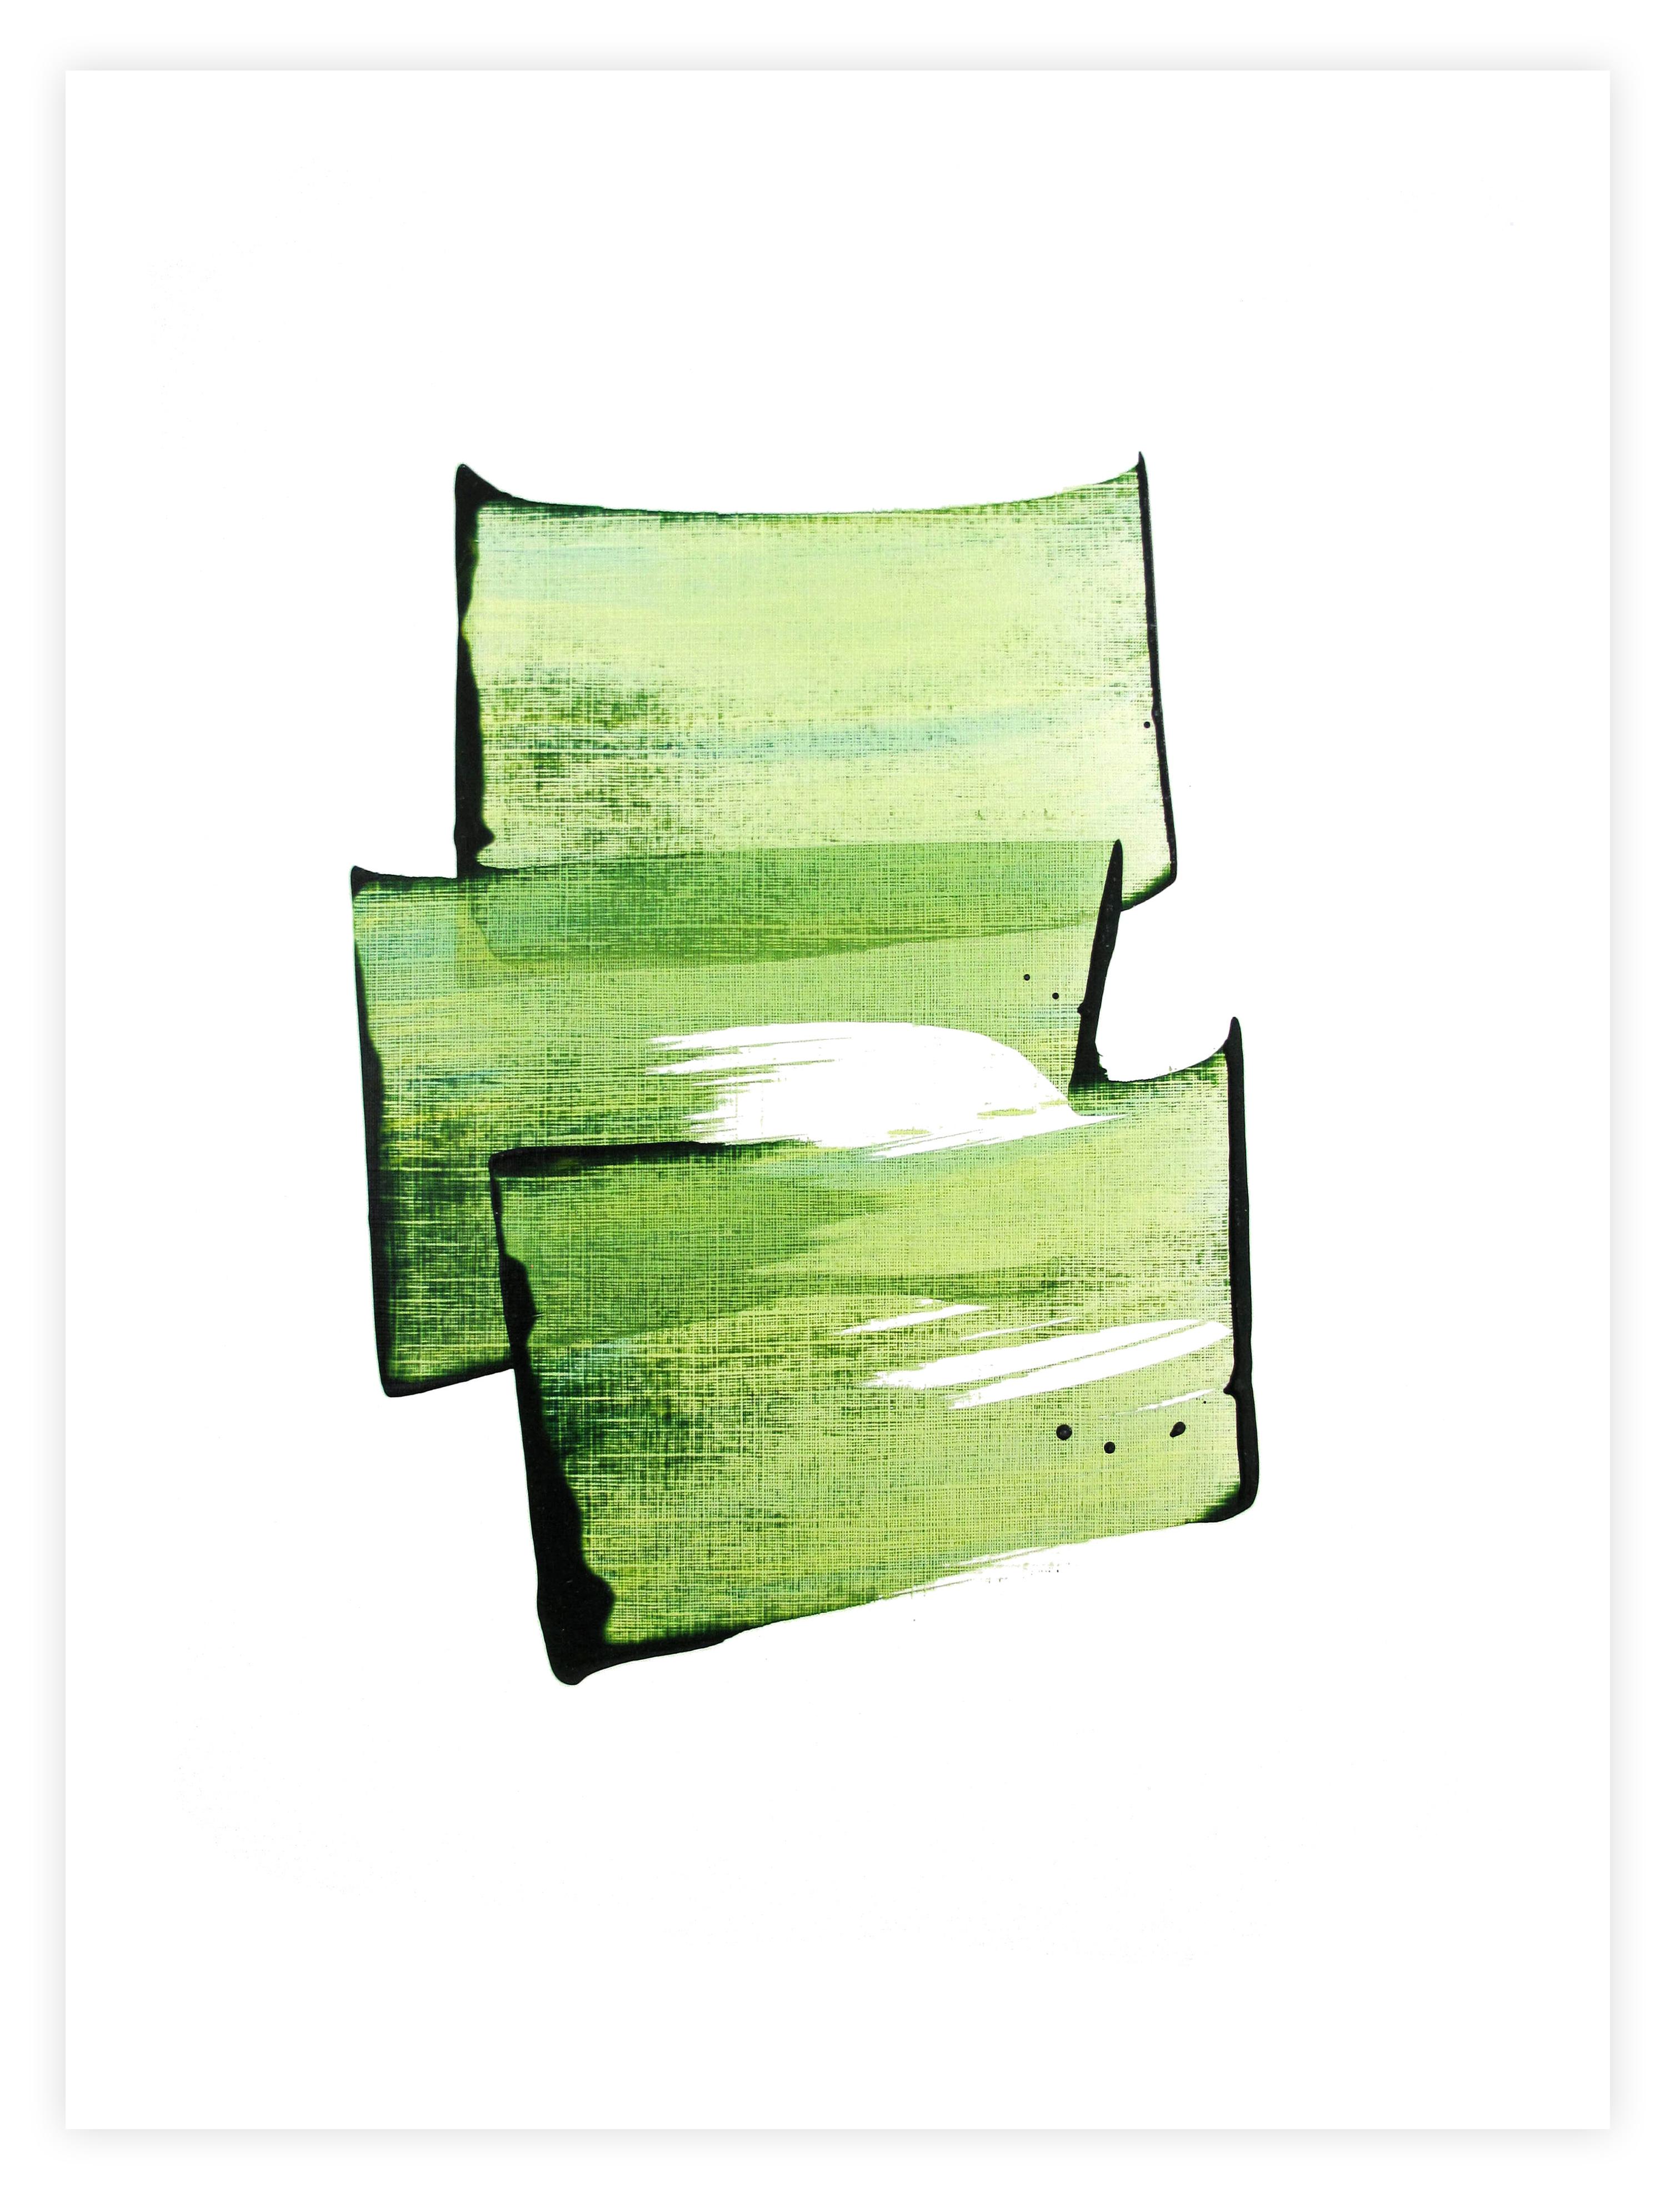 Golden Green 08 (Abstract Painting)

Acrylic on Hahnemühle paper - Unframed

Emma Godebska is a French abstract artist living in Nimes, France.
Her use of natural pigments, reflective of nature itself, is in dialogue with diluted acrylic paint and